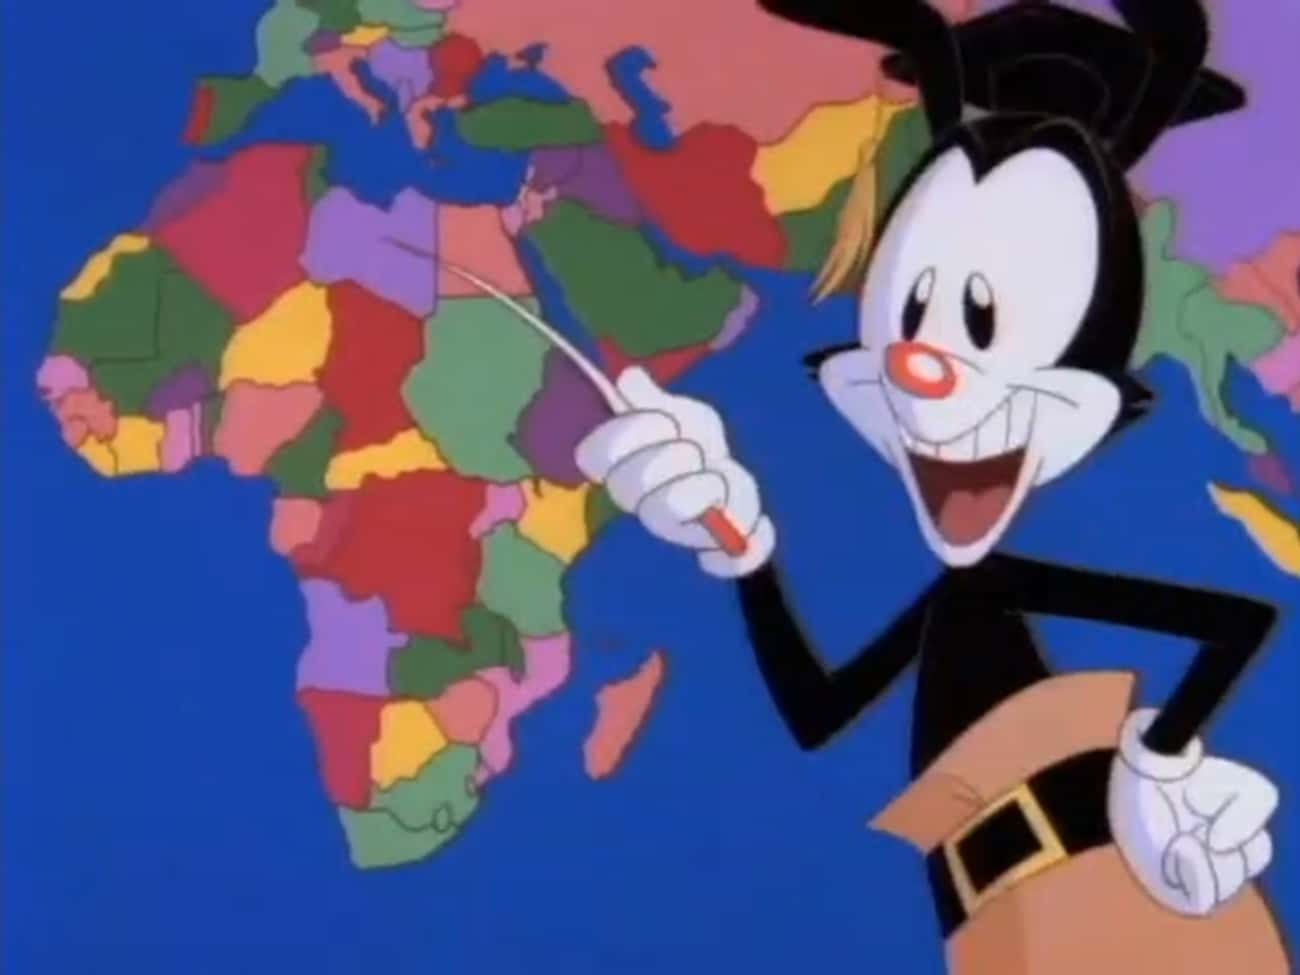 Yakko's World - The Famous Song From 'Animaniacs' - Was Recorded In A Single Take